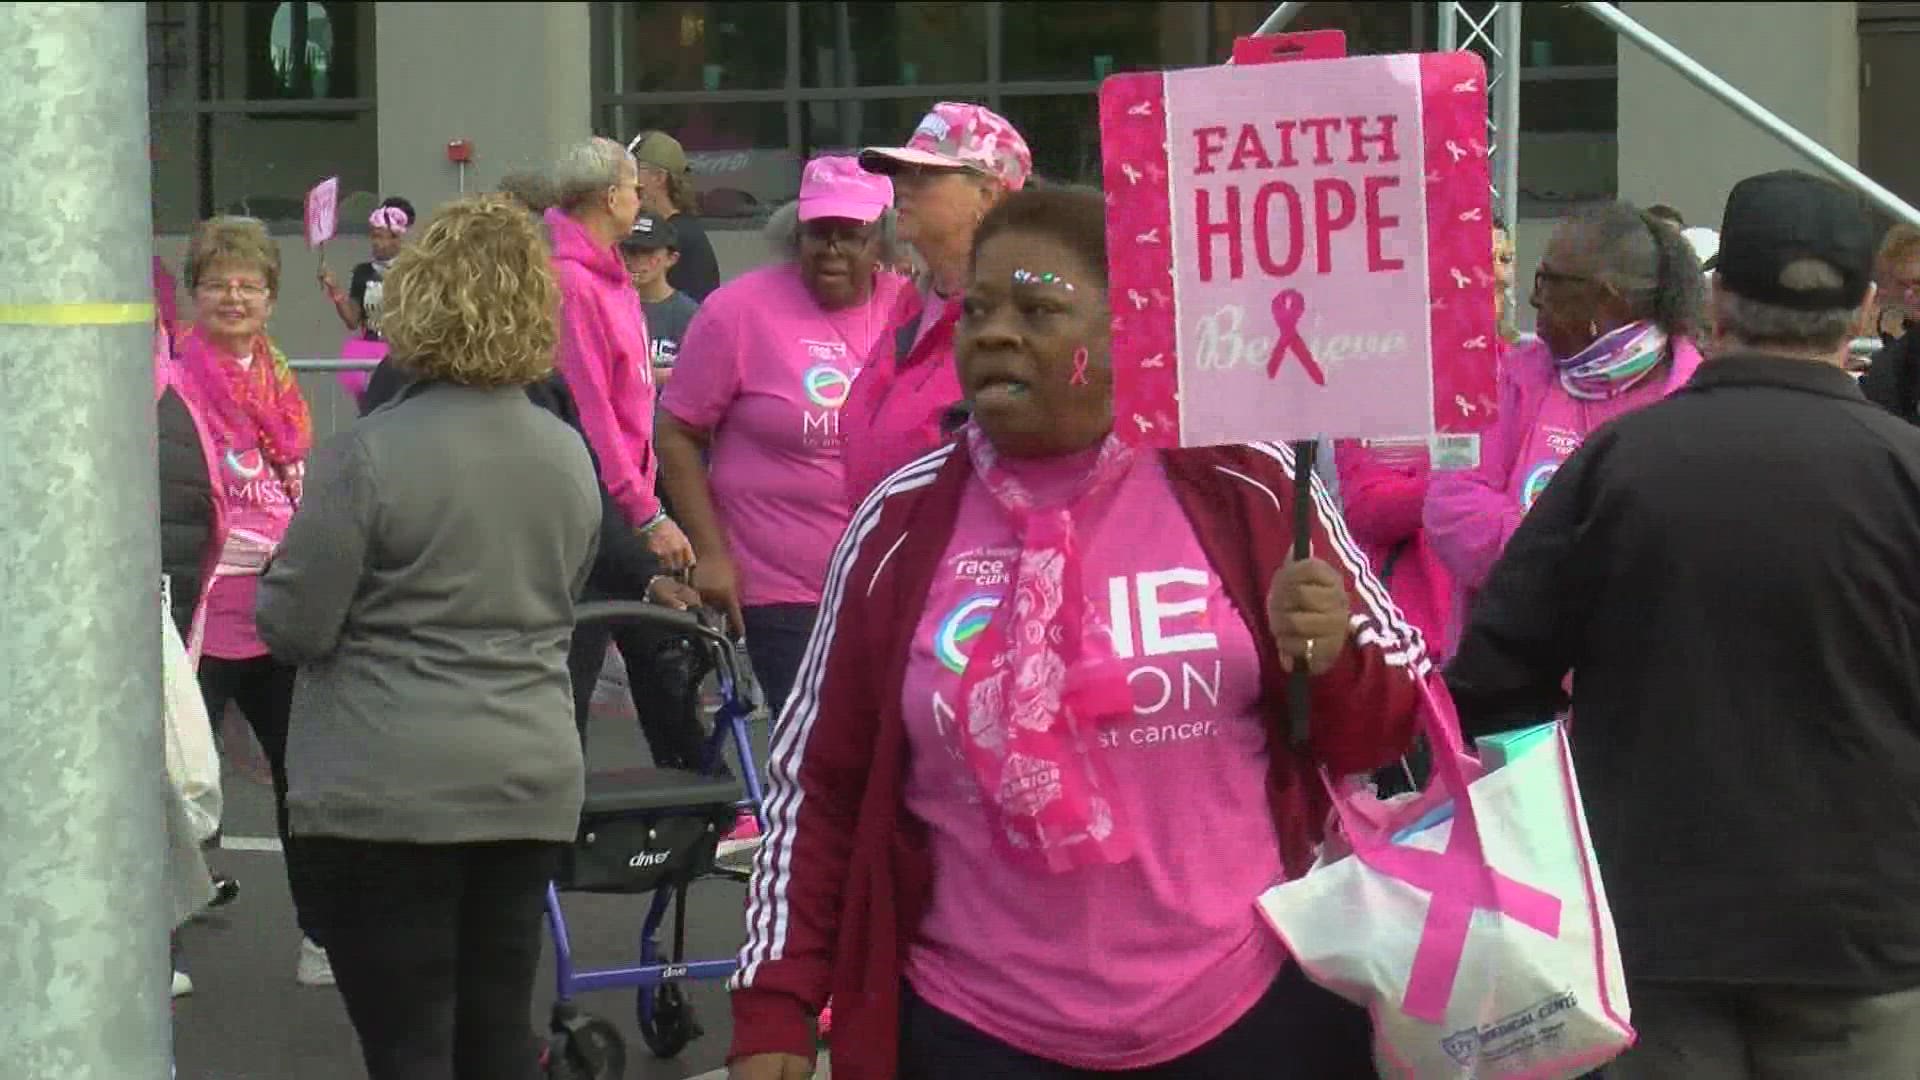 Thousands came together in downtown Toledo for the 29th Susan G. Komen Northwest Ohio Race for the Cure.